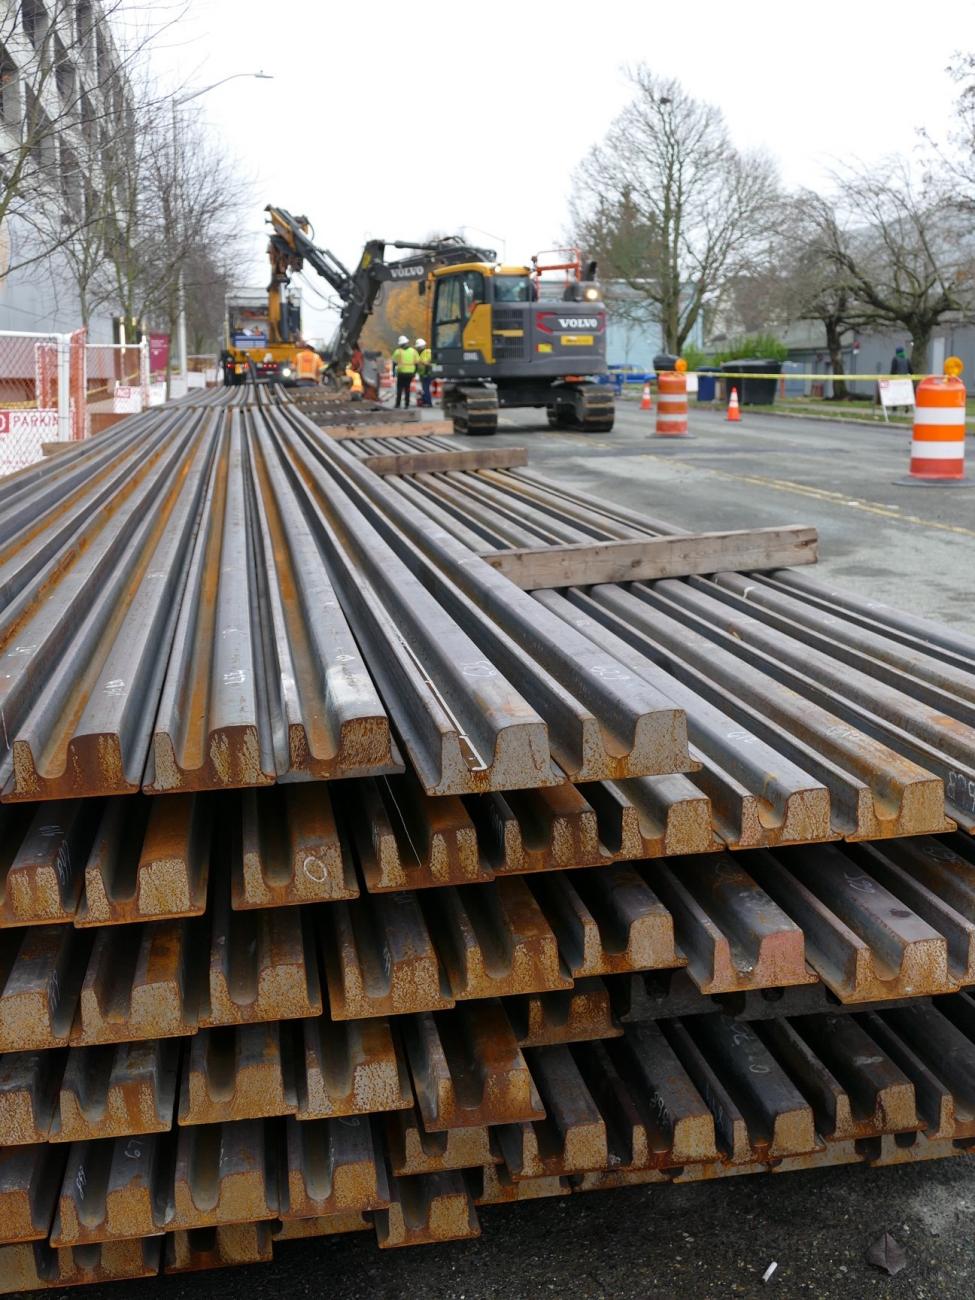 Stacks of rail are pictured, with construction equipment in the background.